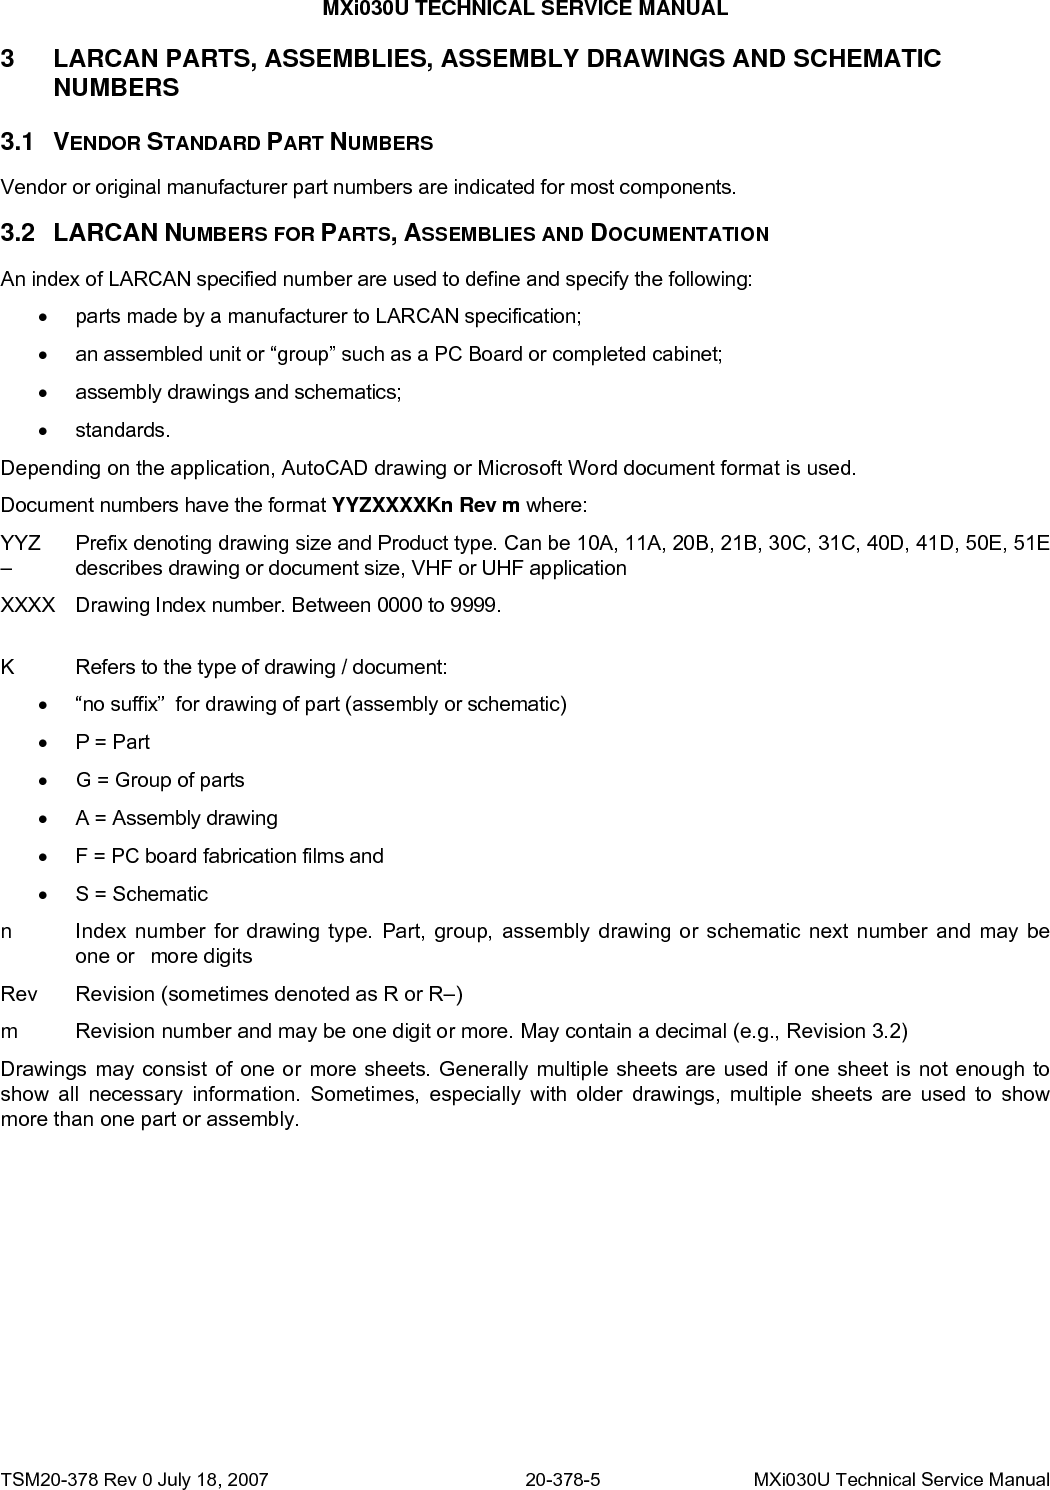 MXi030U TECHNICAL SERVICE MANUAL 3 3.1 3.2 LARCAN PARTS, ASSEMBLIES, ASSEMBLY DRAWINGS AND SCHEMATIC NUMBERS VENDOR STANDARD PART NUMBERS Vendor or original manufacturer part numbers are indicated for most components.  LARCAN NUMBERS FOR PARTS, ASSEMBLIES AND DOCUMENTATION An index of LARCAN specified number are used to define and specify the following: •  parts made by a manufacturer to LARCAN specification; •  an assembled unit or “group” such as a PC Board or completed cabinet;  •  assembly drawings and schematics; • standards. Depending on the application, AutoCAD drawing or Microsoft Word document format is used. Document numbers have the format YYZXXXXKn Rev m where: YYZ  Prefix denoting drawing size and Product type. Can be 10A, 11A, 20B, 21B, 30C, 31C, 40D, 41D, 50E, 51E –   describes drawing or document size, VHF or UHF application XXXX  Drawing Index number. Between 0000 to 9999.  K  Refers to the type of drawing / document: •  “no suffix”  for drawing of part (assembly or schematic) • P = Part •  G = Group of parts •  A = Assembly drawing •  F = PC board fabrication films and  •  S = Schematic  n  Index number for drawing type. Part, group, assembly drawing or schematic next number and may be   one or   more digits Rev  Revision (sometimes denoted as R or R–) m  Revision number and may be one digit or more. May contain a decimal (e.g., Revision 3.2) Drawings may consist of one or more sheets. Generally multiple sheets are used if one sheet is not enough to show all necessary information. Sometimes, especially with older drawings, multiple sheets are used to show more than one part or assembly. TSM20-378 Rev 0 July 18, 2007  20-378-5  MXi030U Technical Service Manual 